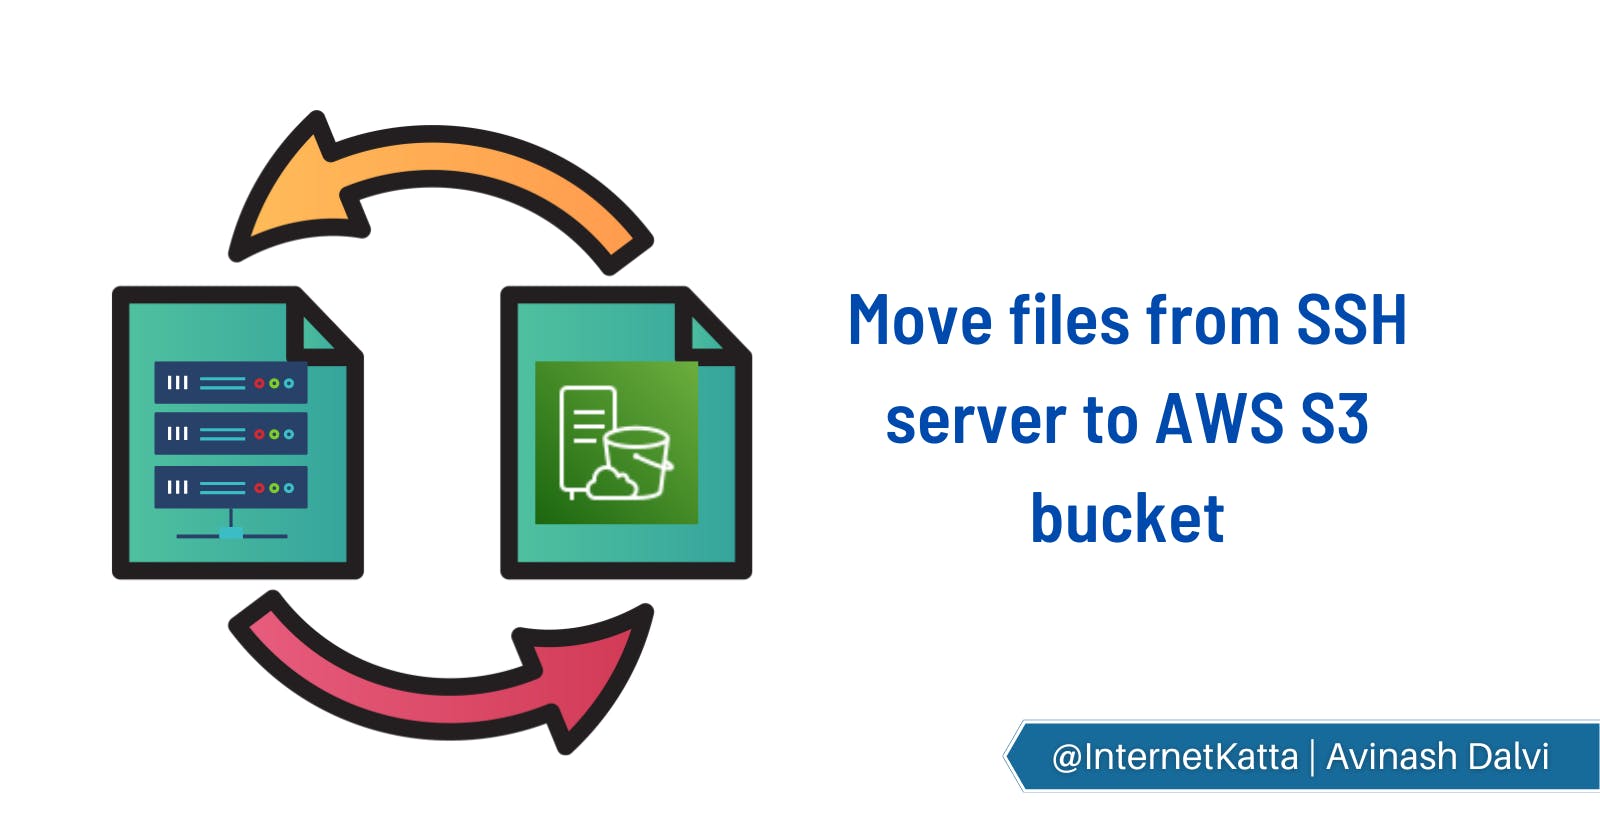 Move files from SSH server to S3 bucket